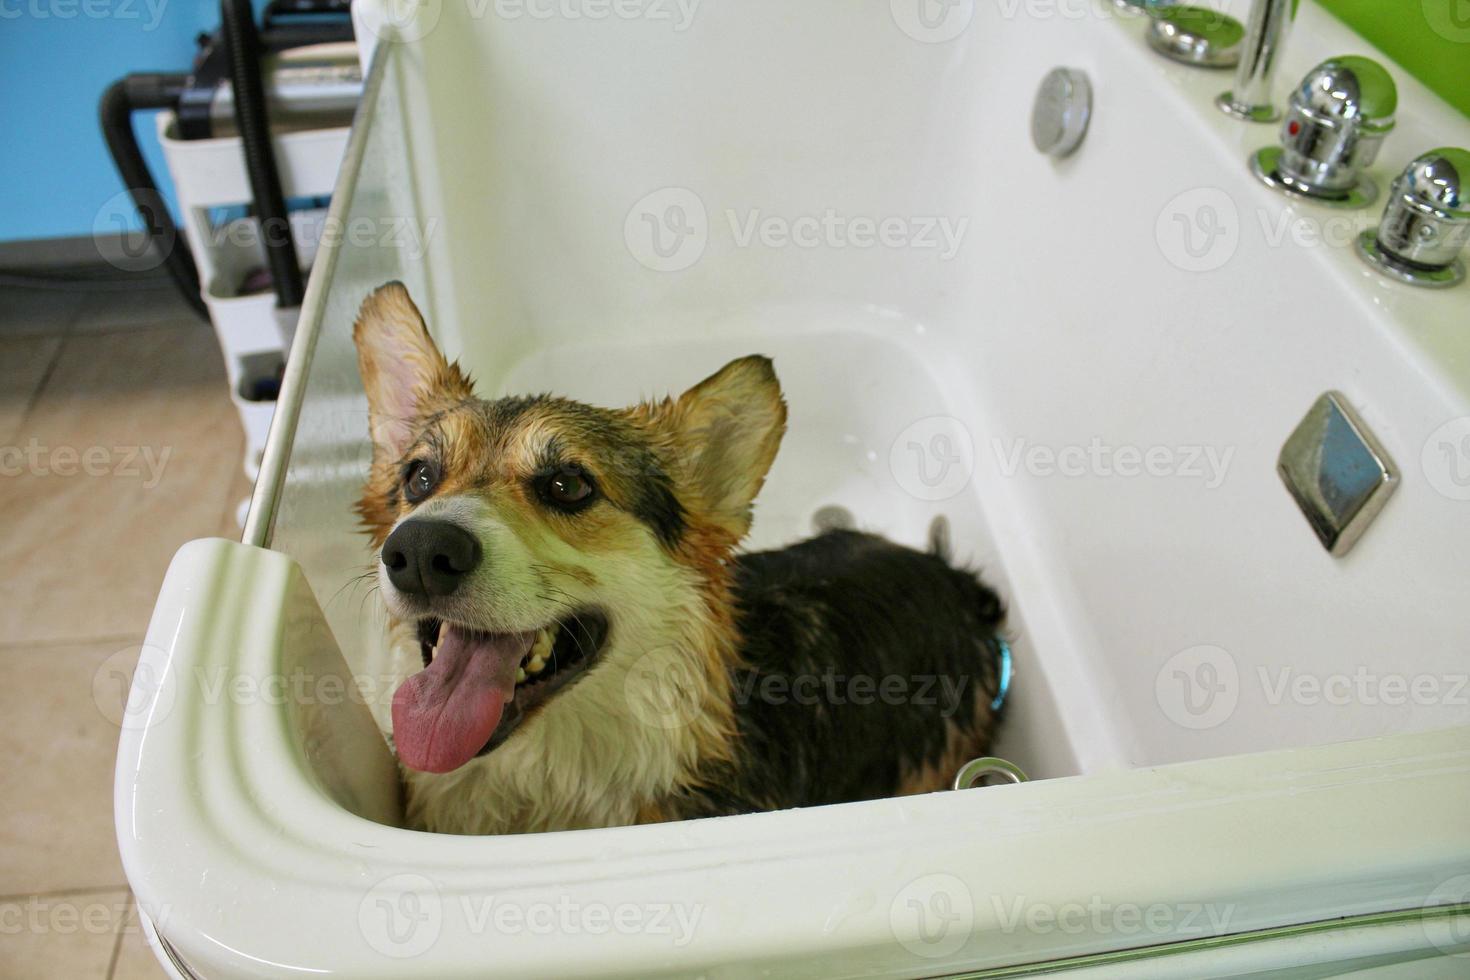 Corgi welsh pembroke with wet fur standing in a bathroom after bathing and washing in grooming salon. Professional hygiene, welness, spa procedures of animals concept. Domestic pet care idea. Close up photo